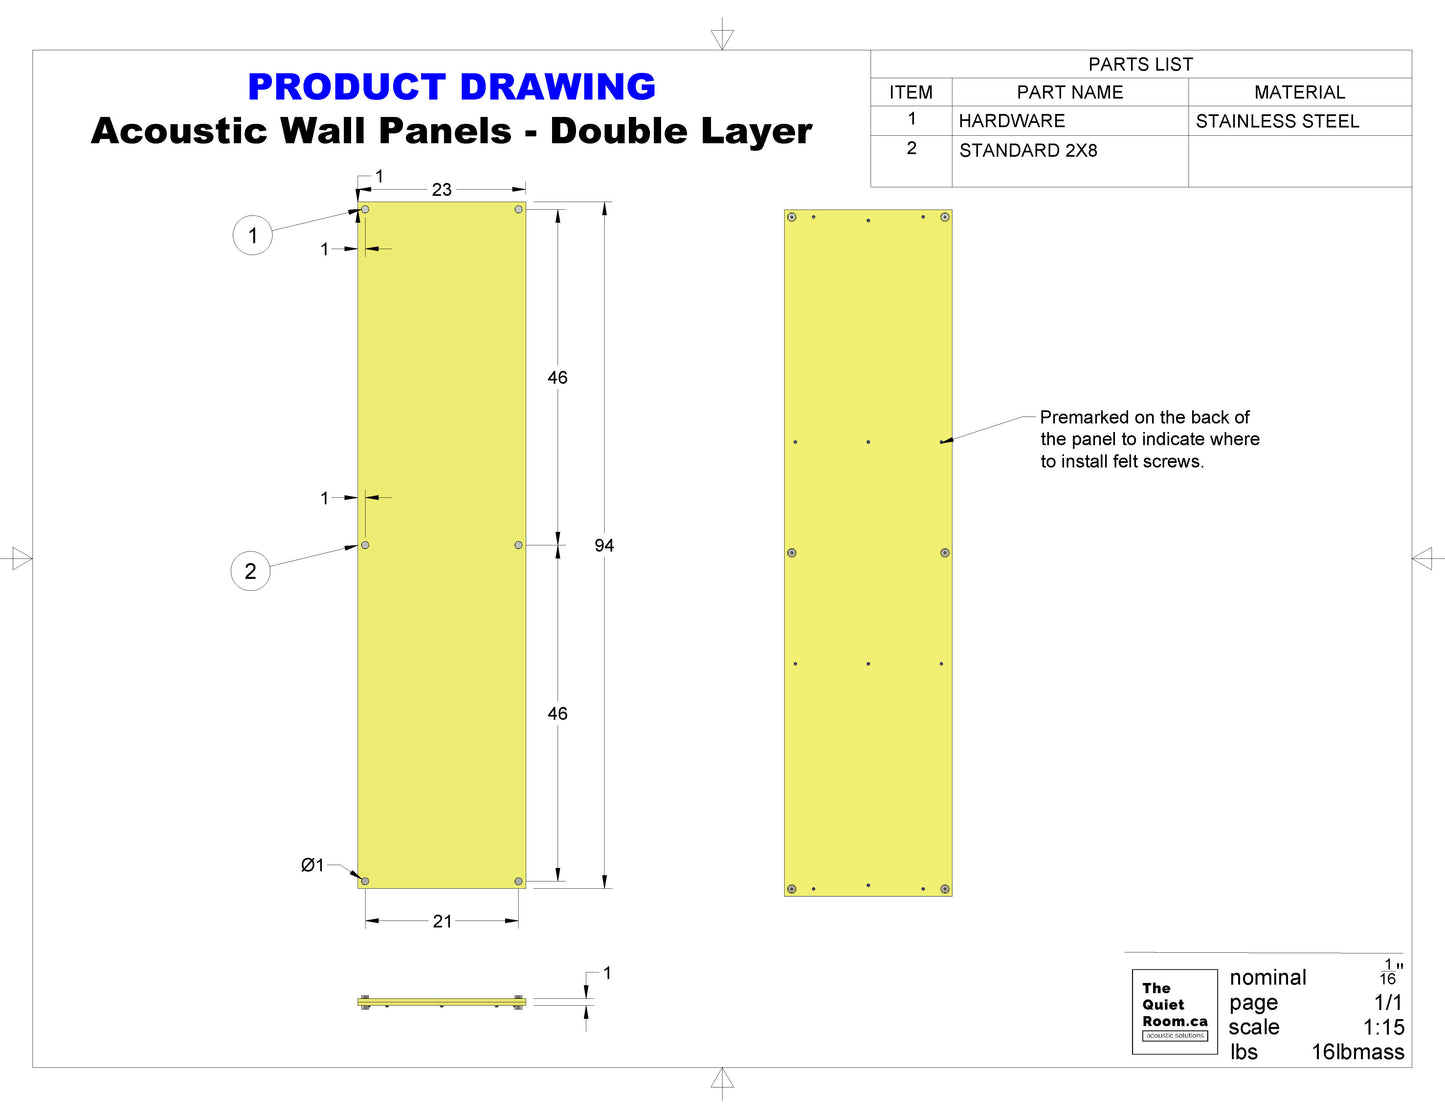 2x8_Acoustic_Wall_Panels_Drawing_assembly